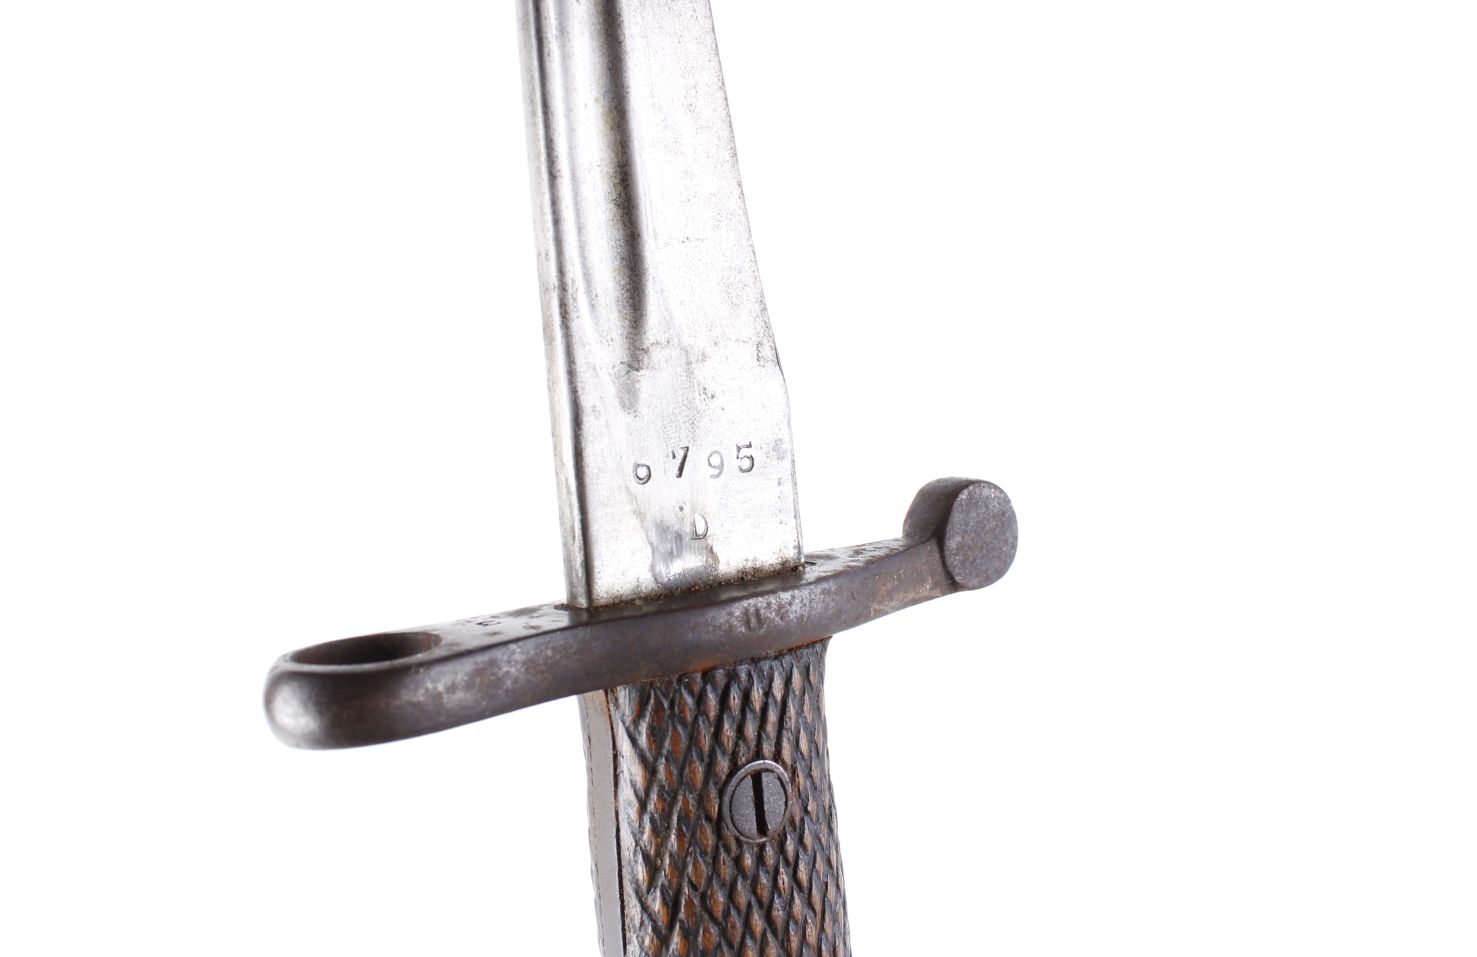 Spanish M1943 Mauser Bolo bayonet, 9¾ ins blade no. 6795, chequered wood grips, in steel scabbard - Image 2 of 3